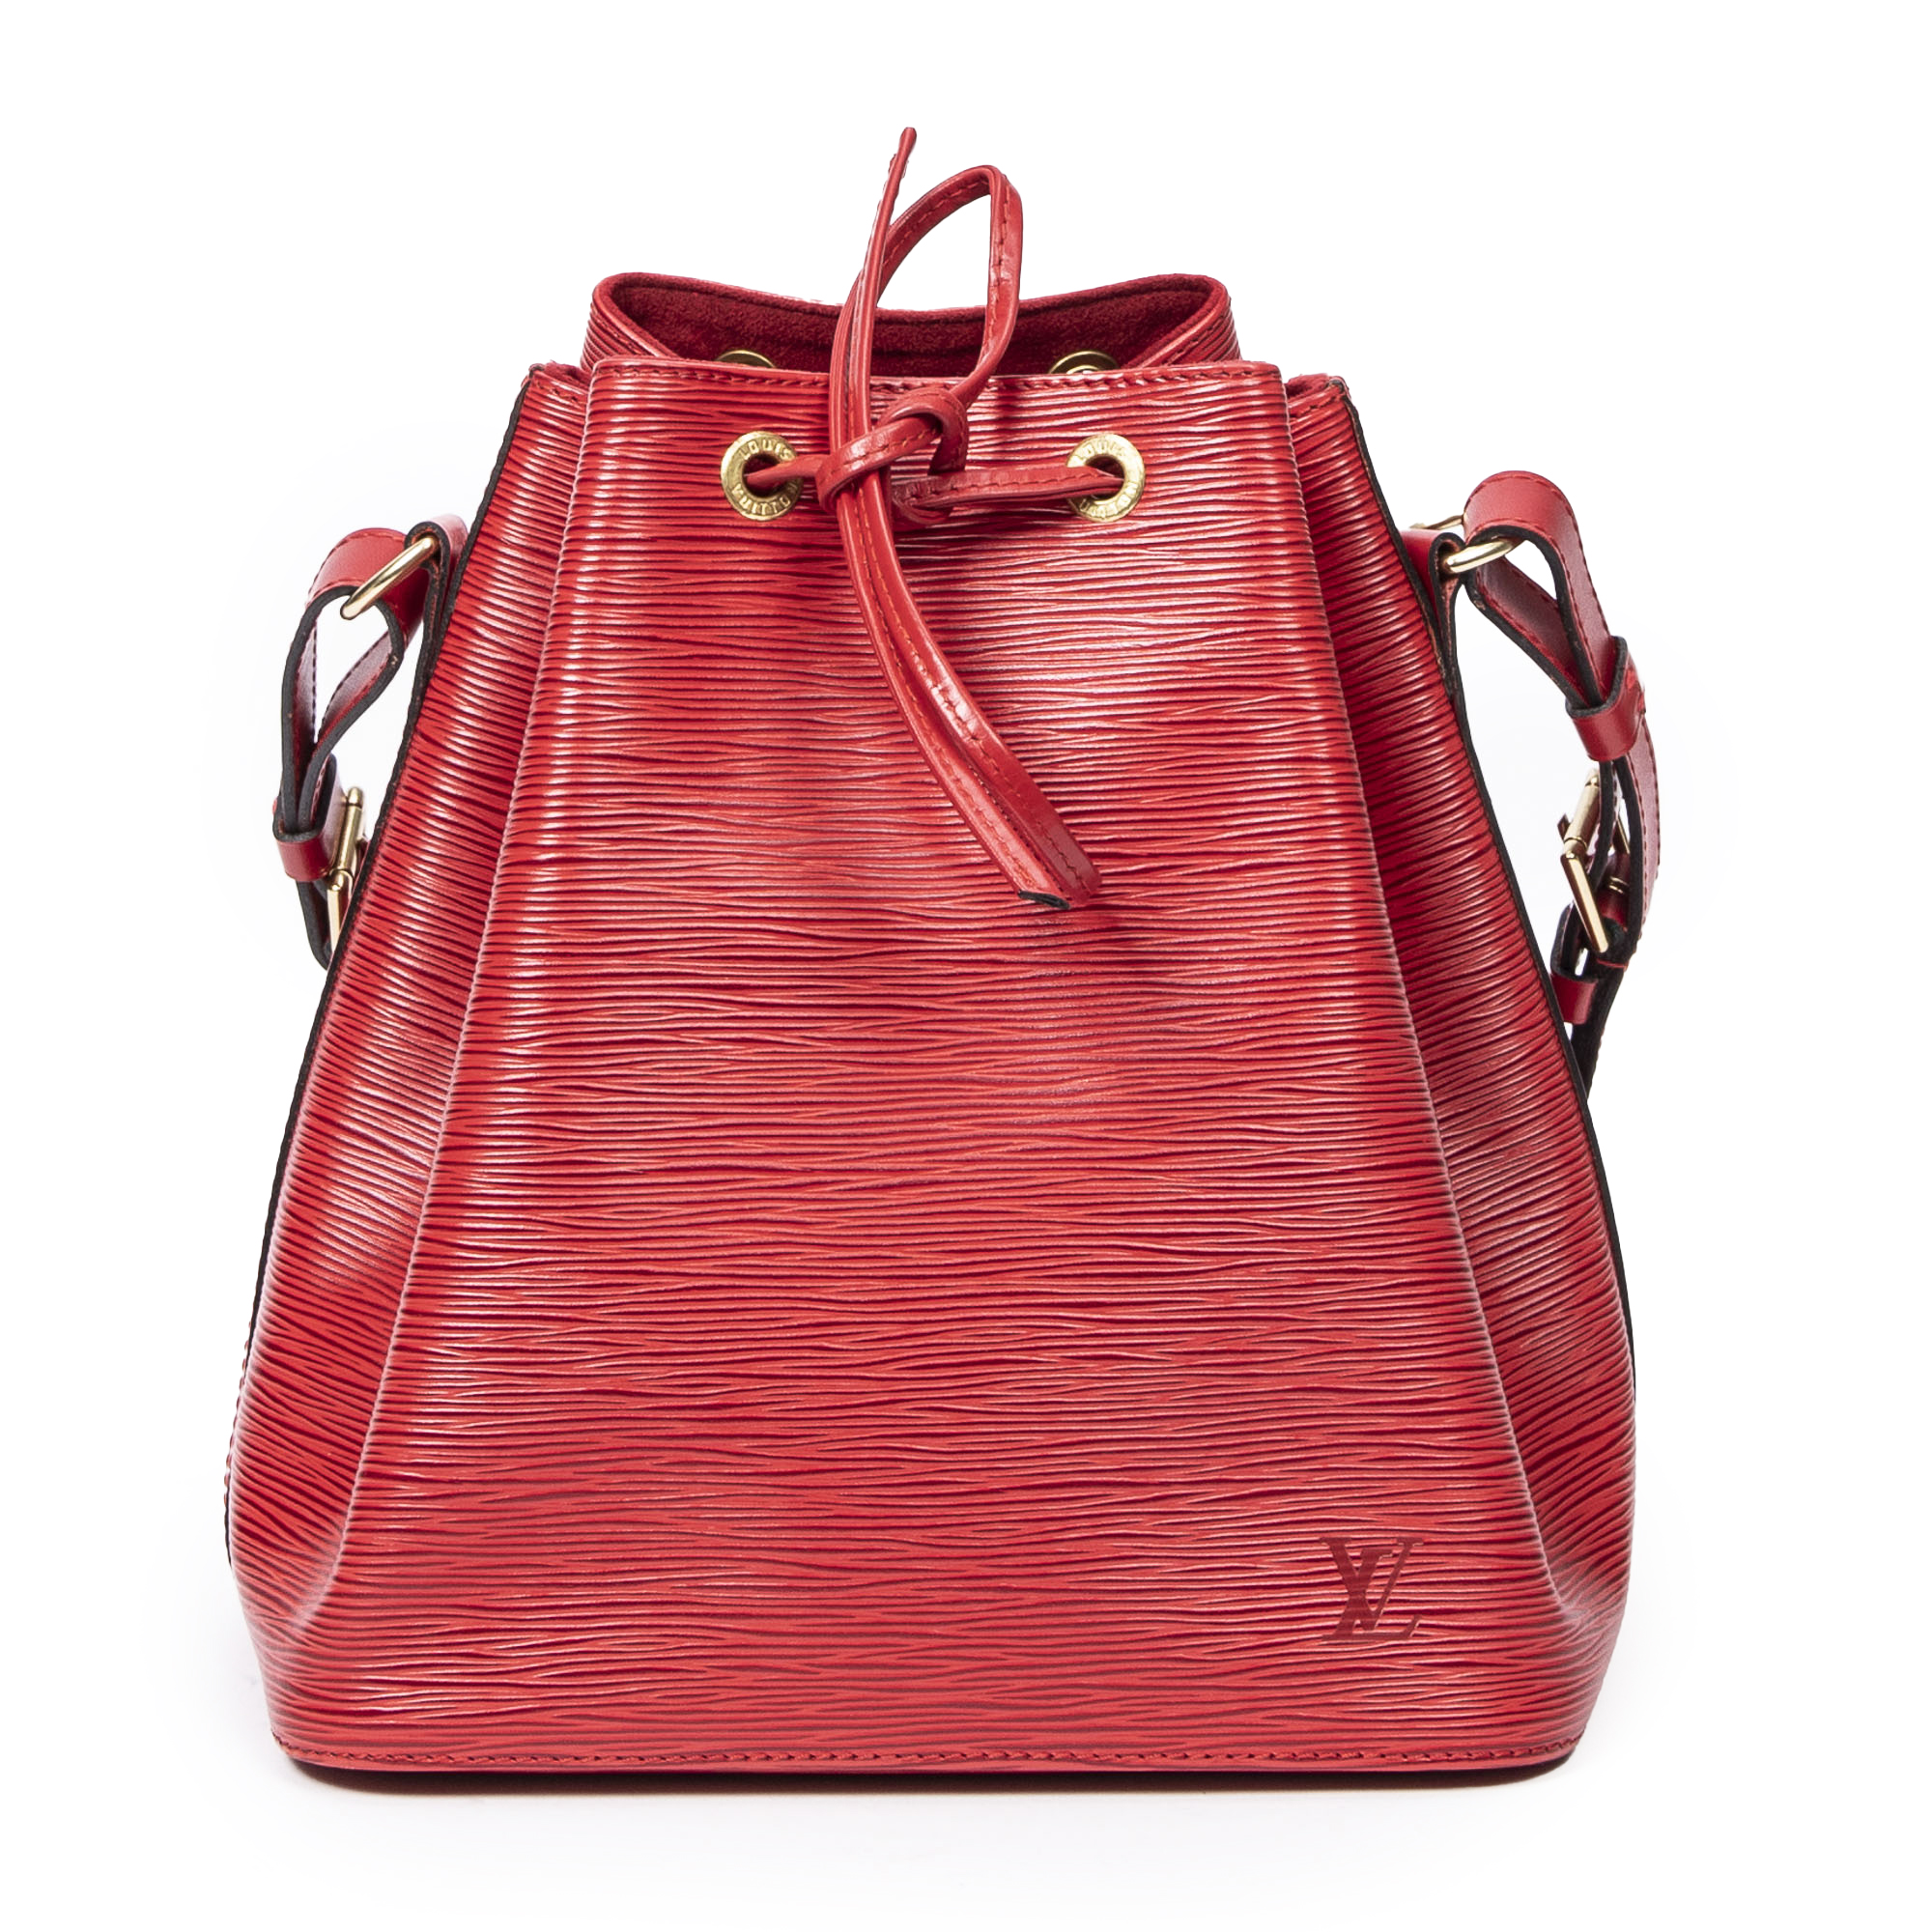 Louis Vuitton Noe PM Bucket Bag in Red EPI Leather, France 1994.